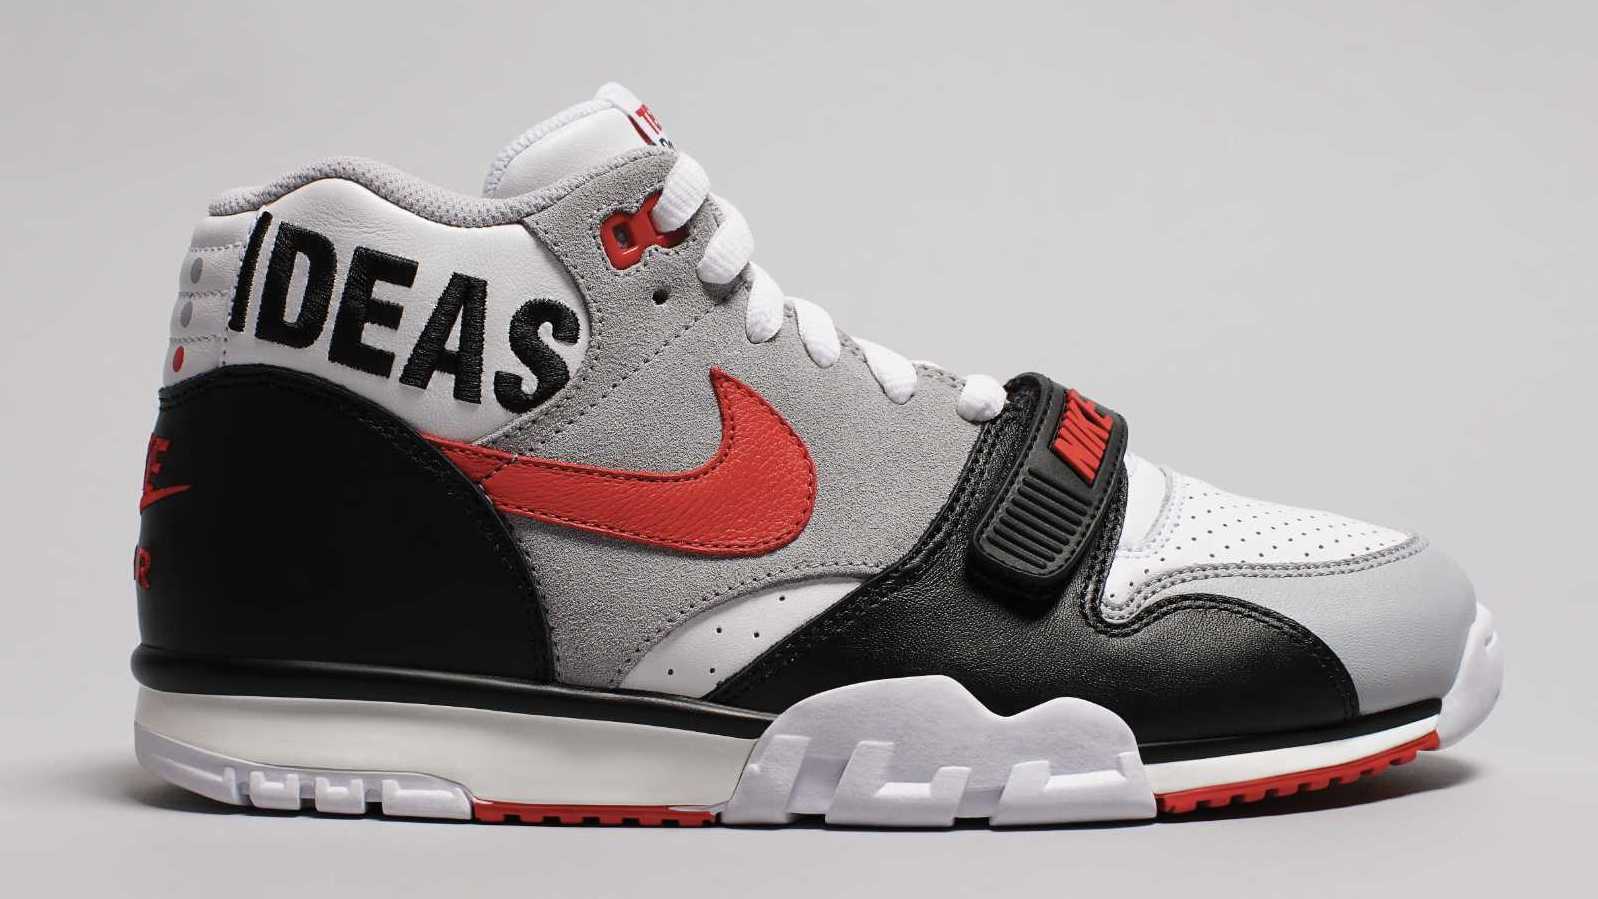 TEDxPortland x Nike Air Trainer 1 Auction Profile